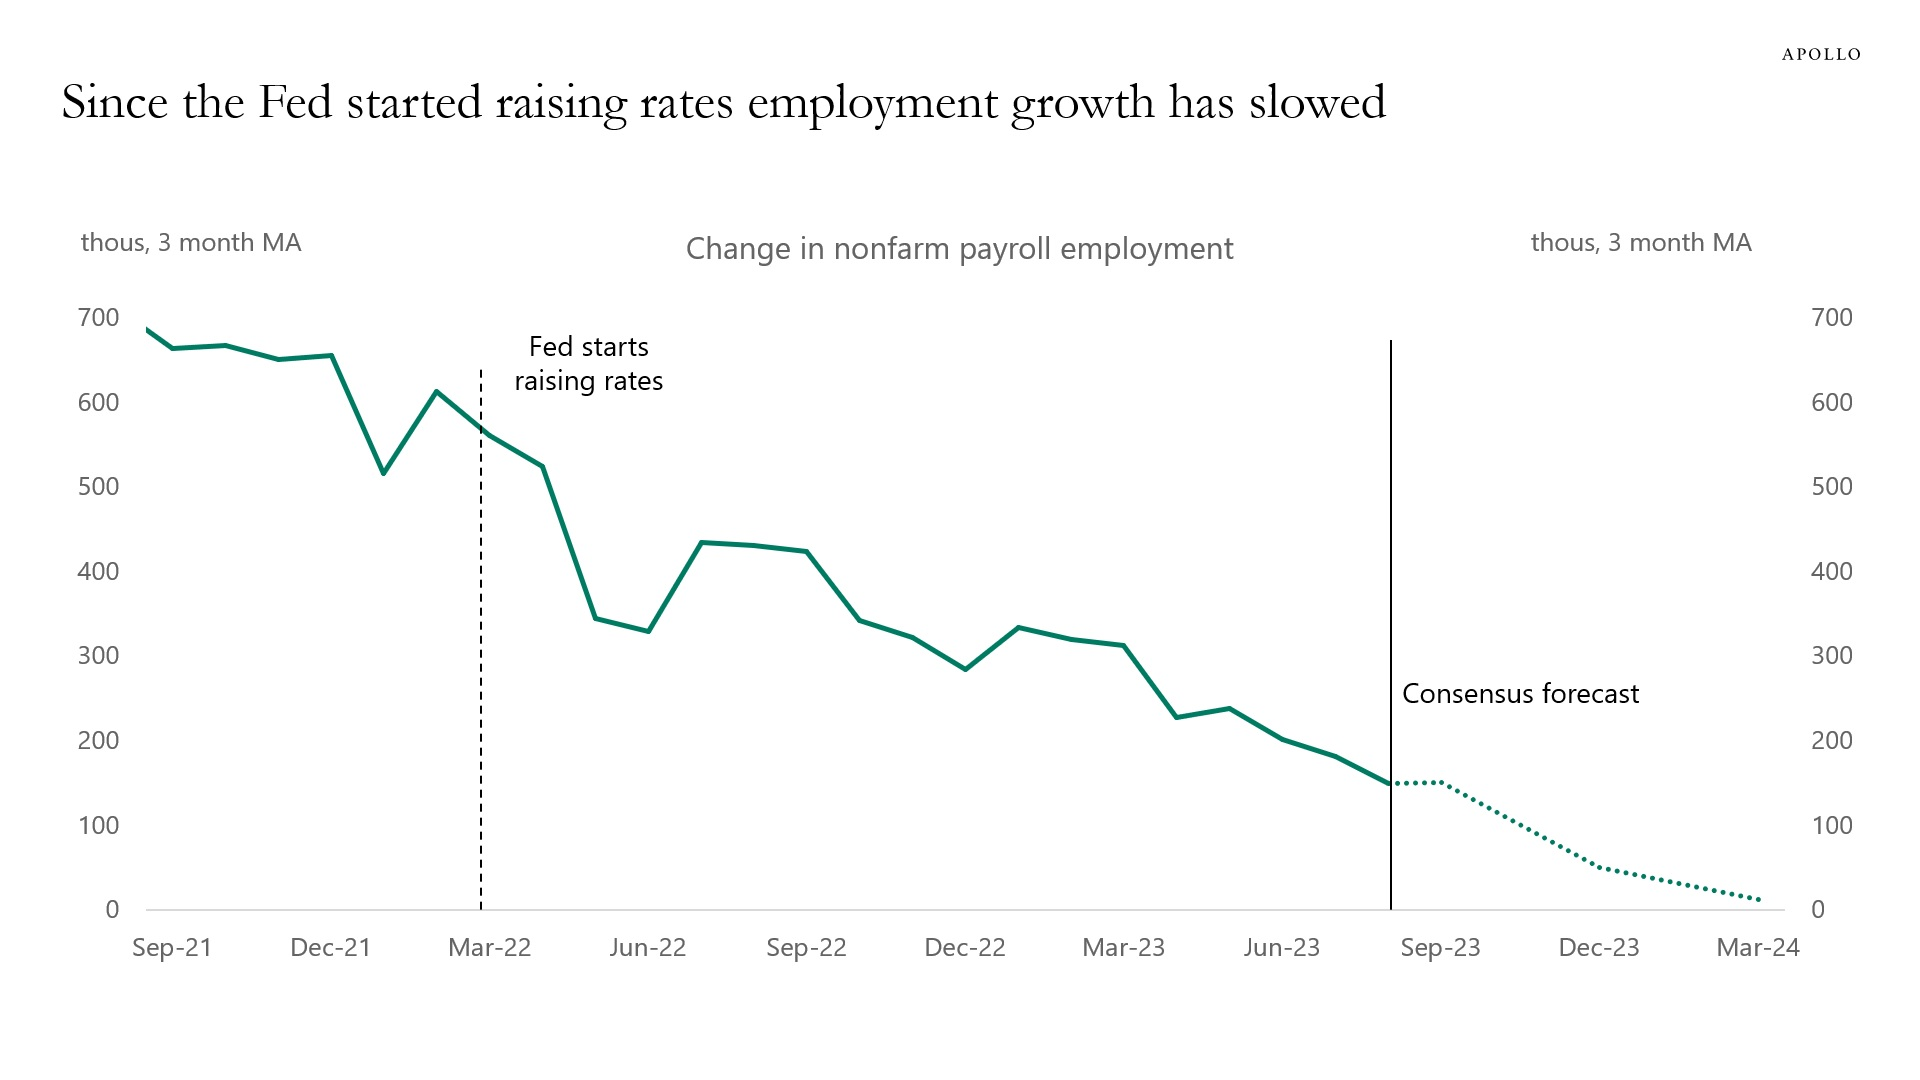 Graph showing decrease in change in nonfarm payroll employment